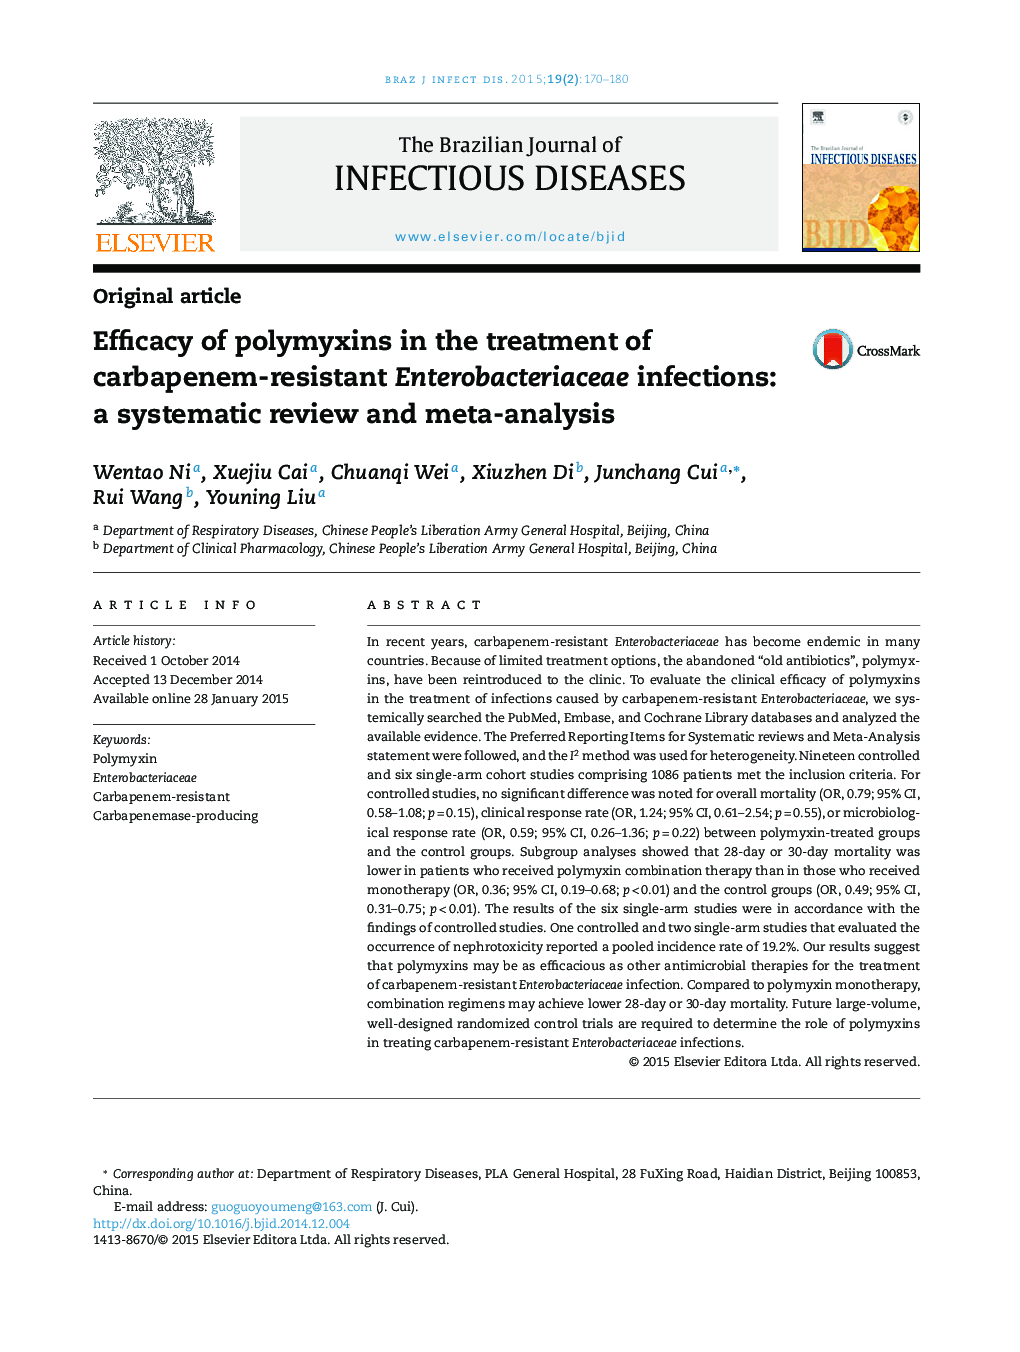 Efficacy of polymyxins in the treatment of carbapenem-resistant Enterobacteriaceae infections: a systematic review and meta-analysis